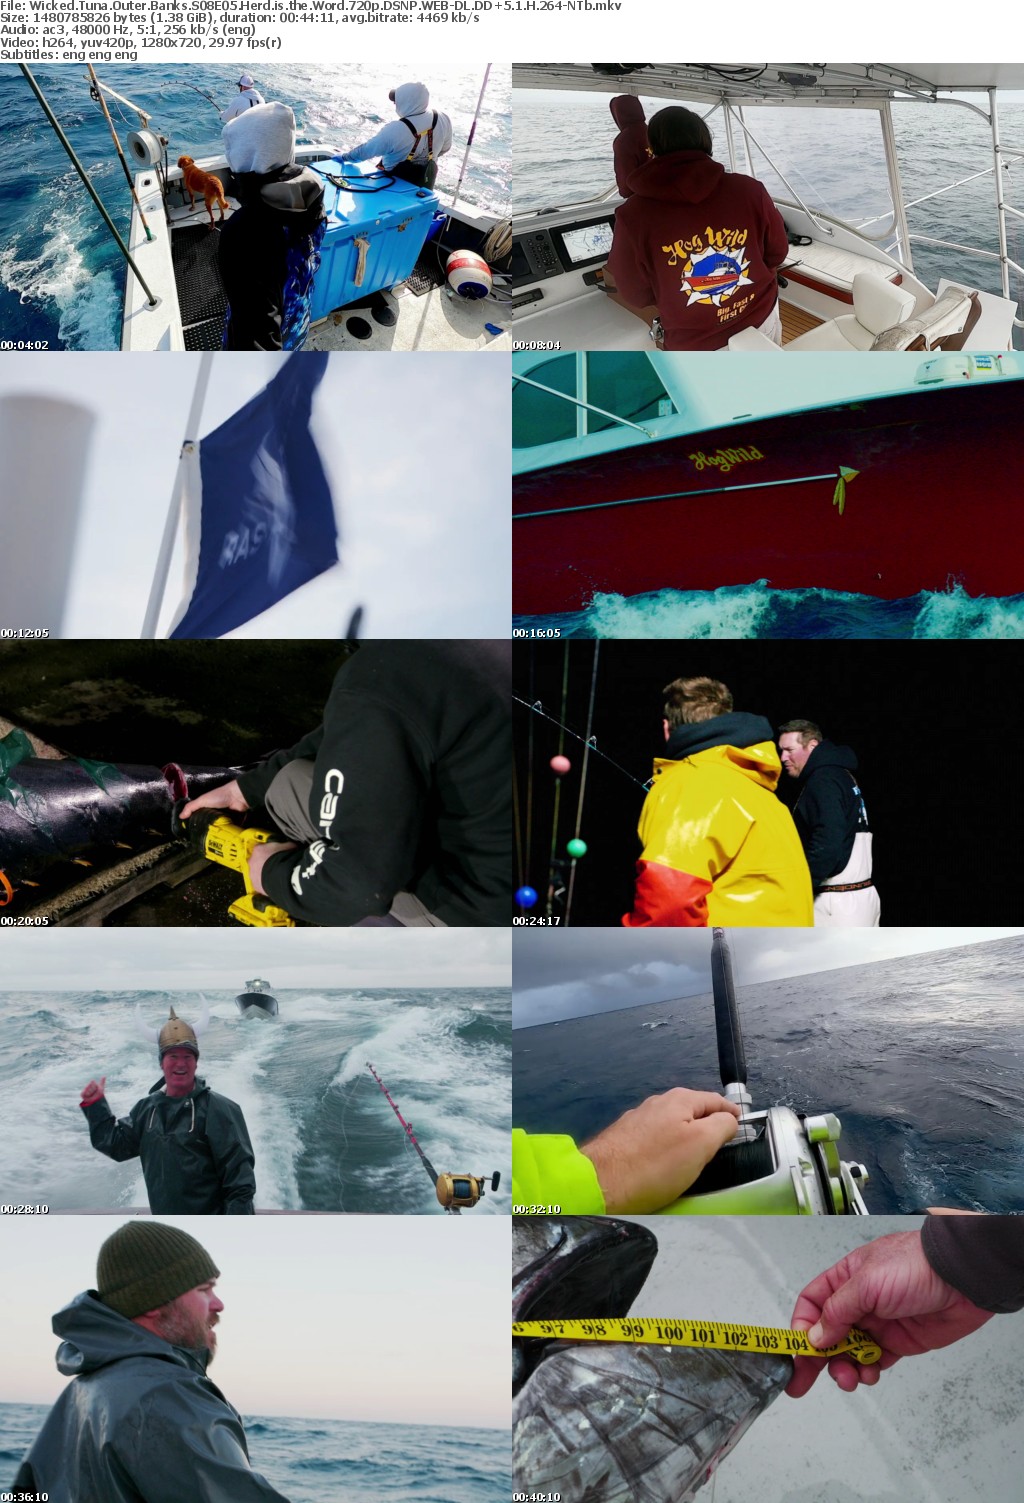 Wicked Tuna Outer Banks S08E05 Herd is the Word 720p DSNP WEBRip DDP5 1 x264-NTb